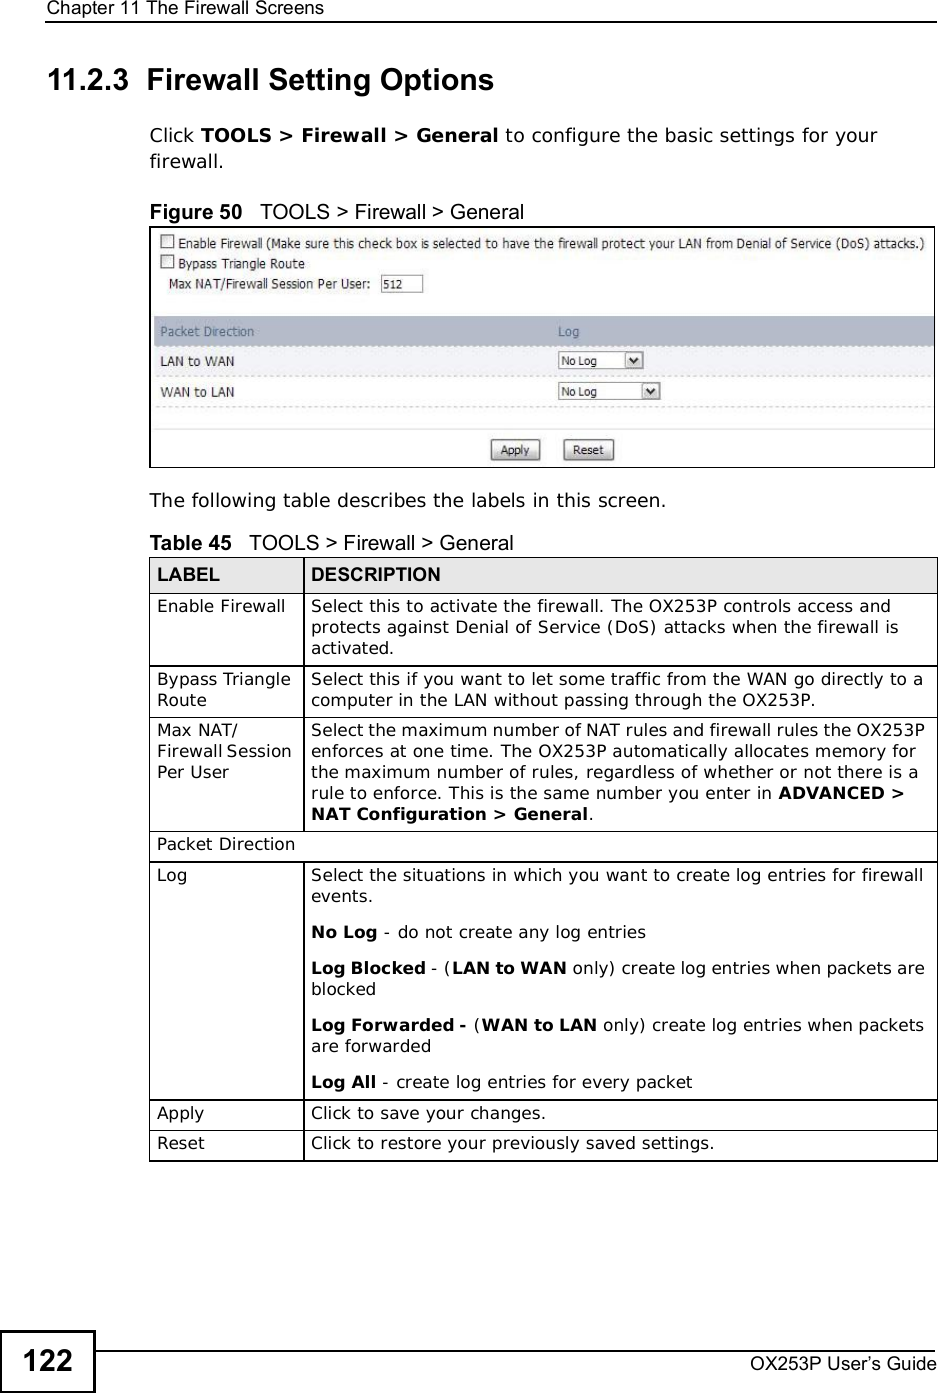 Chapter 11The Firewall ScreensOX253P User’s Guide12211.2.3  Firewall Setting OptionsClick TOOLS &gt; Firewall &gt; General to configure the basic settings for your firewall.Figure 50   TOOLS &gt; Firewall &gt; GeneralThe following table describes the labels in this screen. Table 45   TOOLS &gt; Firewall &gt; GeneralLABEL DESCRIPTIONEnable Firewall Select this to activate the firewall. The OX253P controls access and protects against Denial of Service (DoS) attacks when the firewall is activated.Bypass Triangle Route Select this if you want to let some traffic from the WAN go directly to a computer in the LAN without passing through the OX253P.Max NAT/Firewall Session Per UserSelect the maximum number of NAT rules and firewall rules the OX253P enforces at one time. The OX253P automatically allocates memory for the maximum number of rules, regardless of whether or not there is a rule to enforce. This is the same number you enter in ADVANCED &gt; NAT Configuration &gt; General.Packet DirectionLog Select the situations in which you want to create log entries for firewall events.No Log - do not create any log entriesLog Blocked - (LAN to WAN only) create log entries when packets are blockedLog Forwarded - (WAN to LAN only) create log entries when packets are forwardedLog All - create log entries for every packetApply Click to save your changes.Reset Click to restore your previously saved settings.